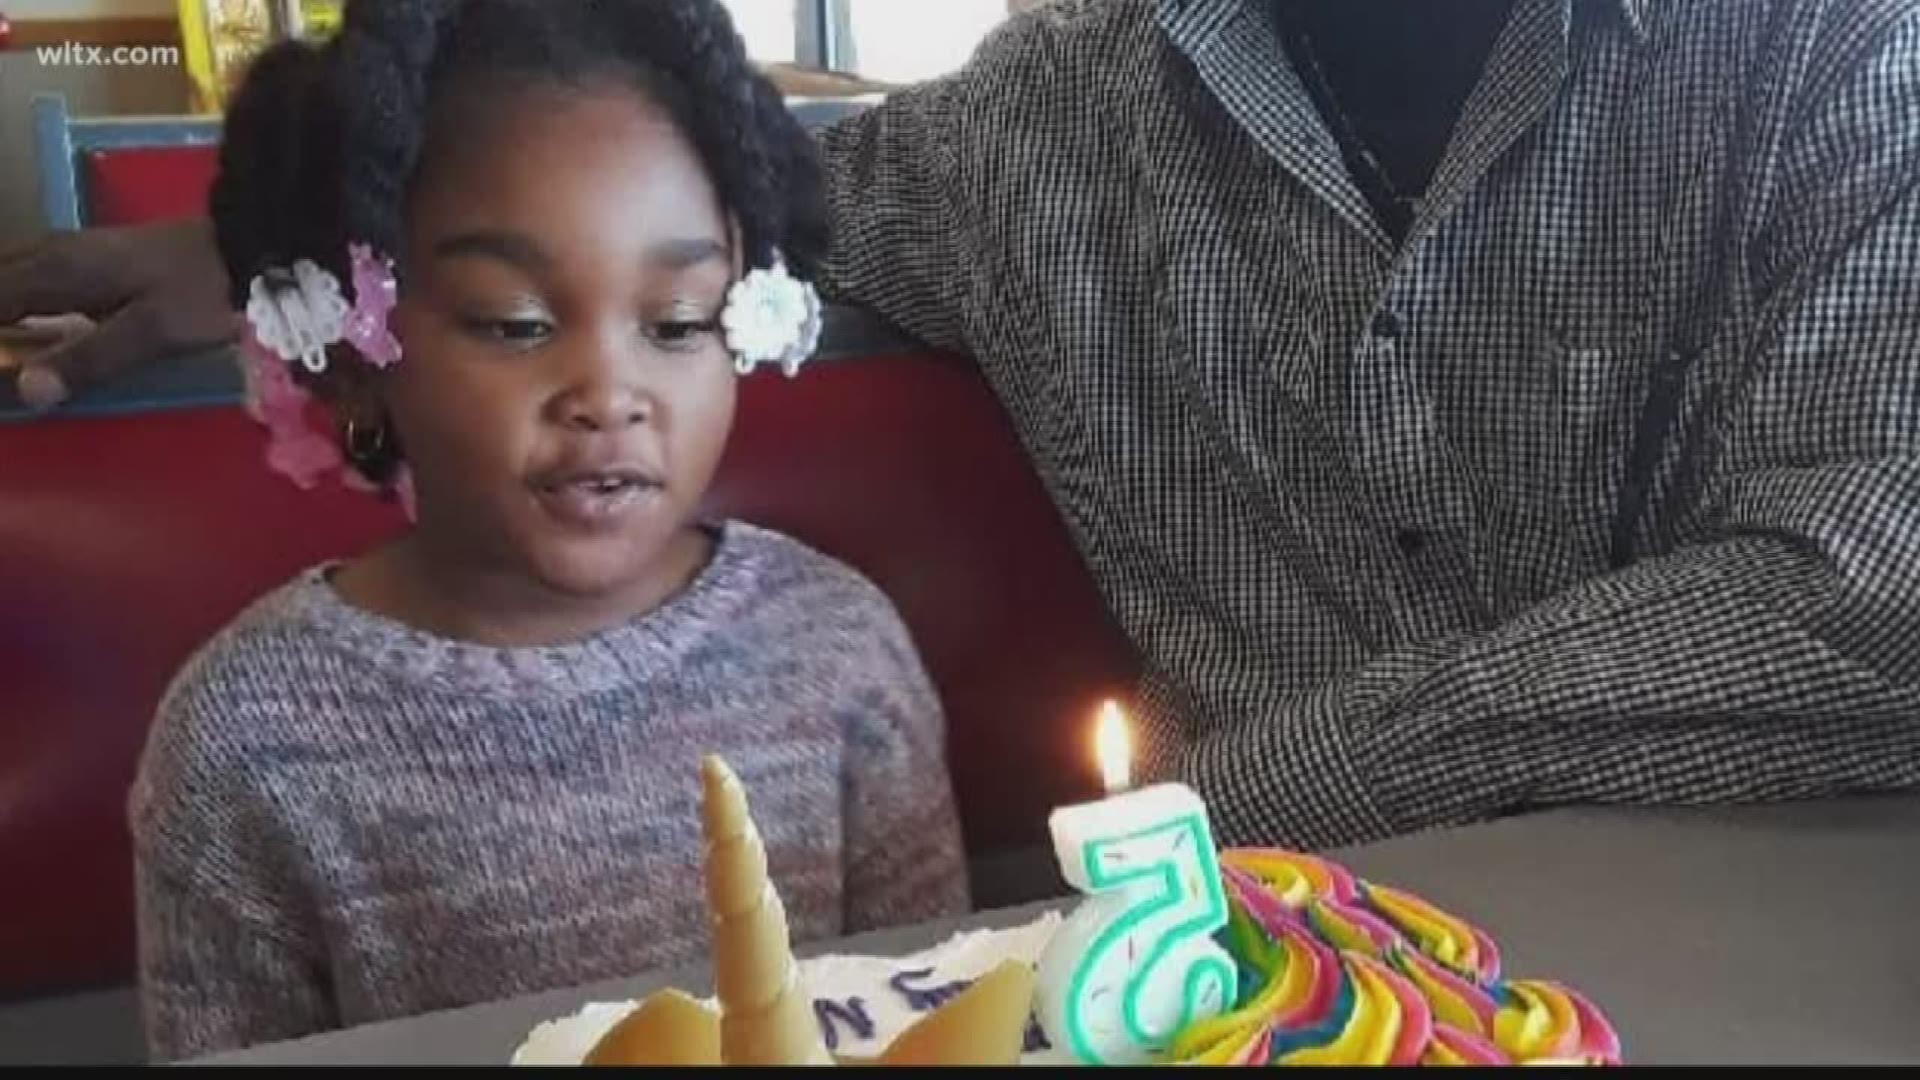 Its been more than a week since the 5-year-old went missing in Sumter.